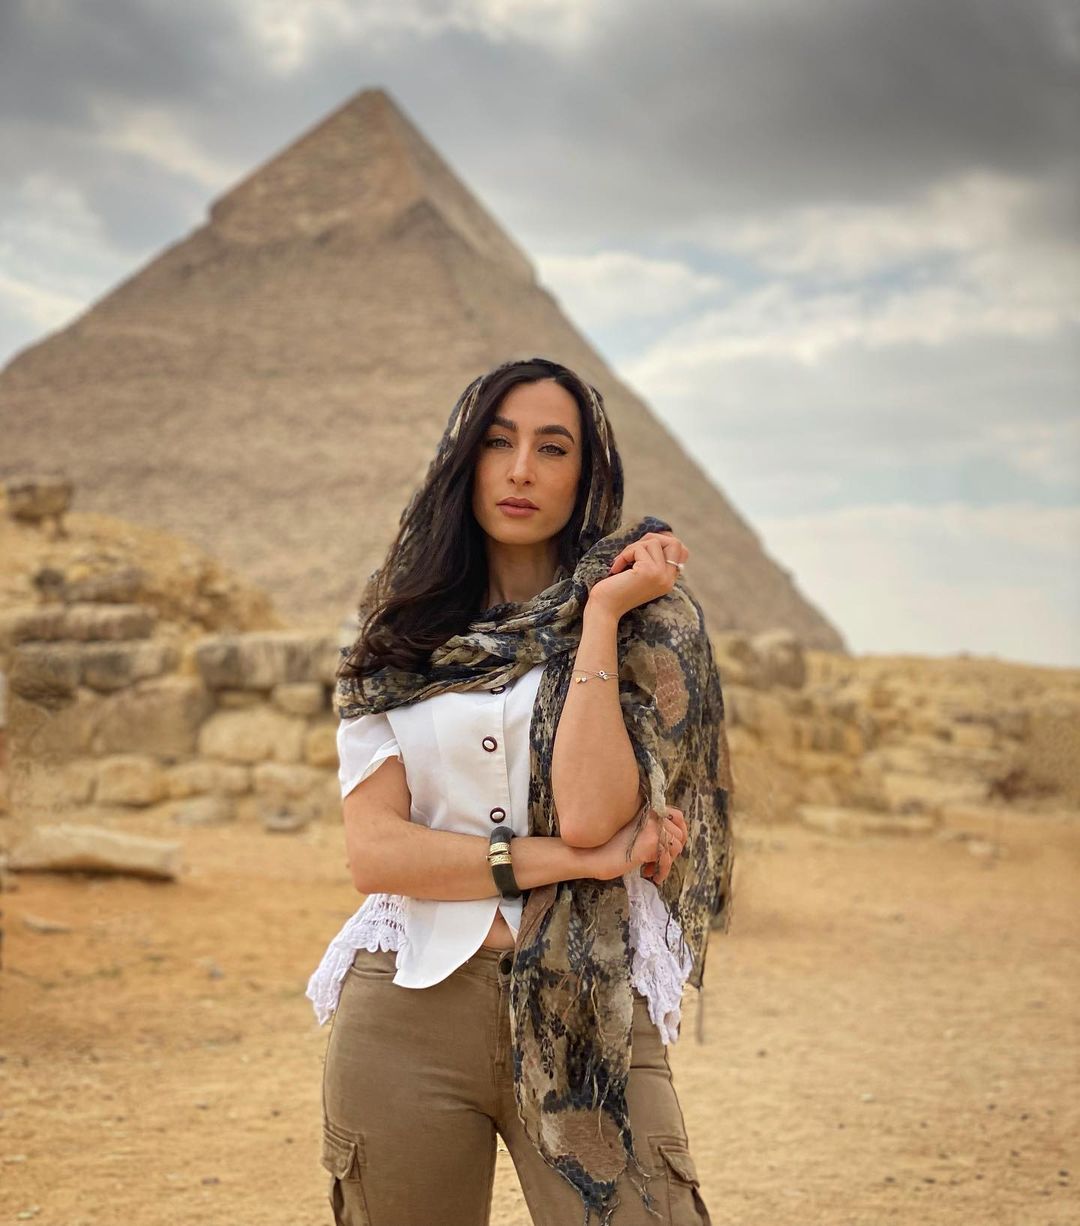 Kate Valério in front of the pyramids in Egypt